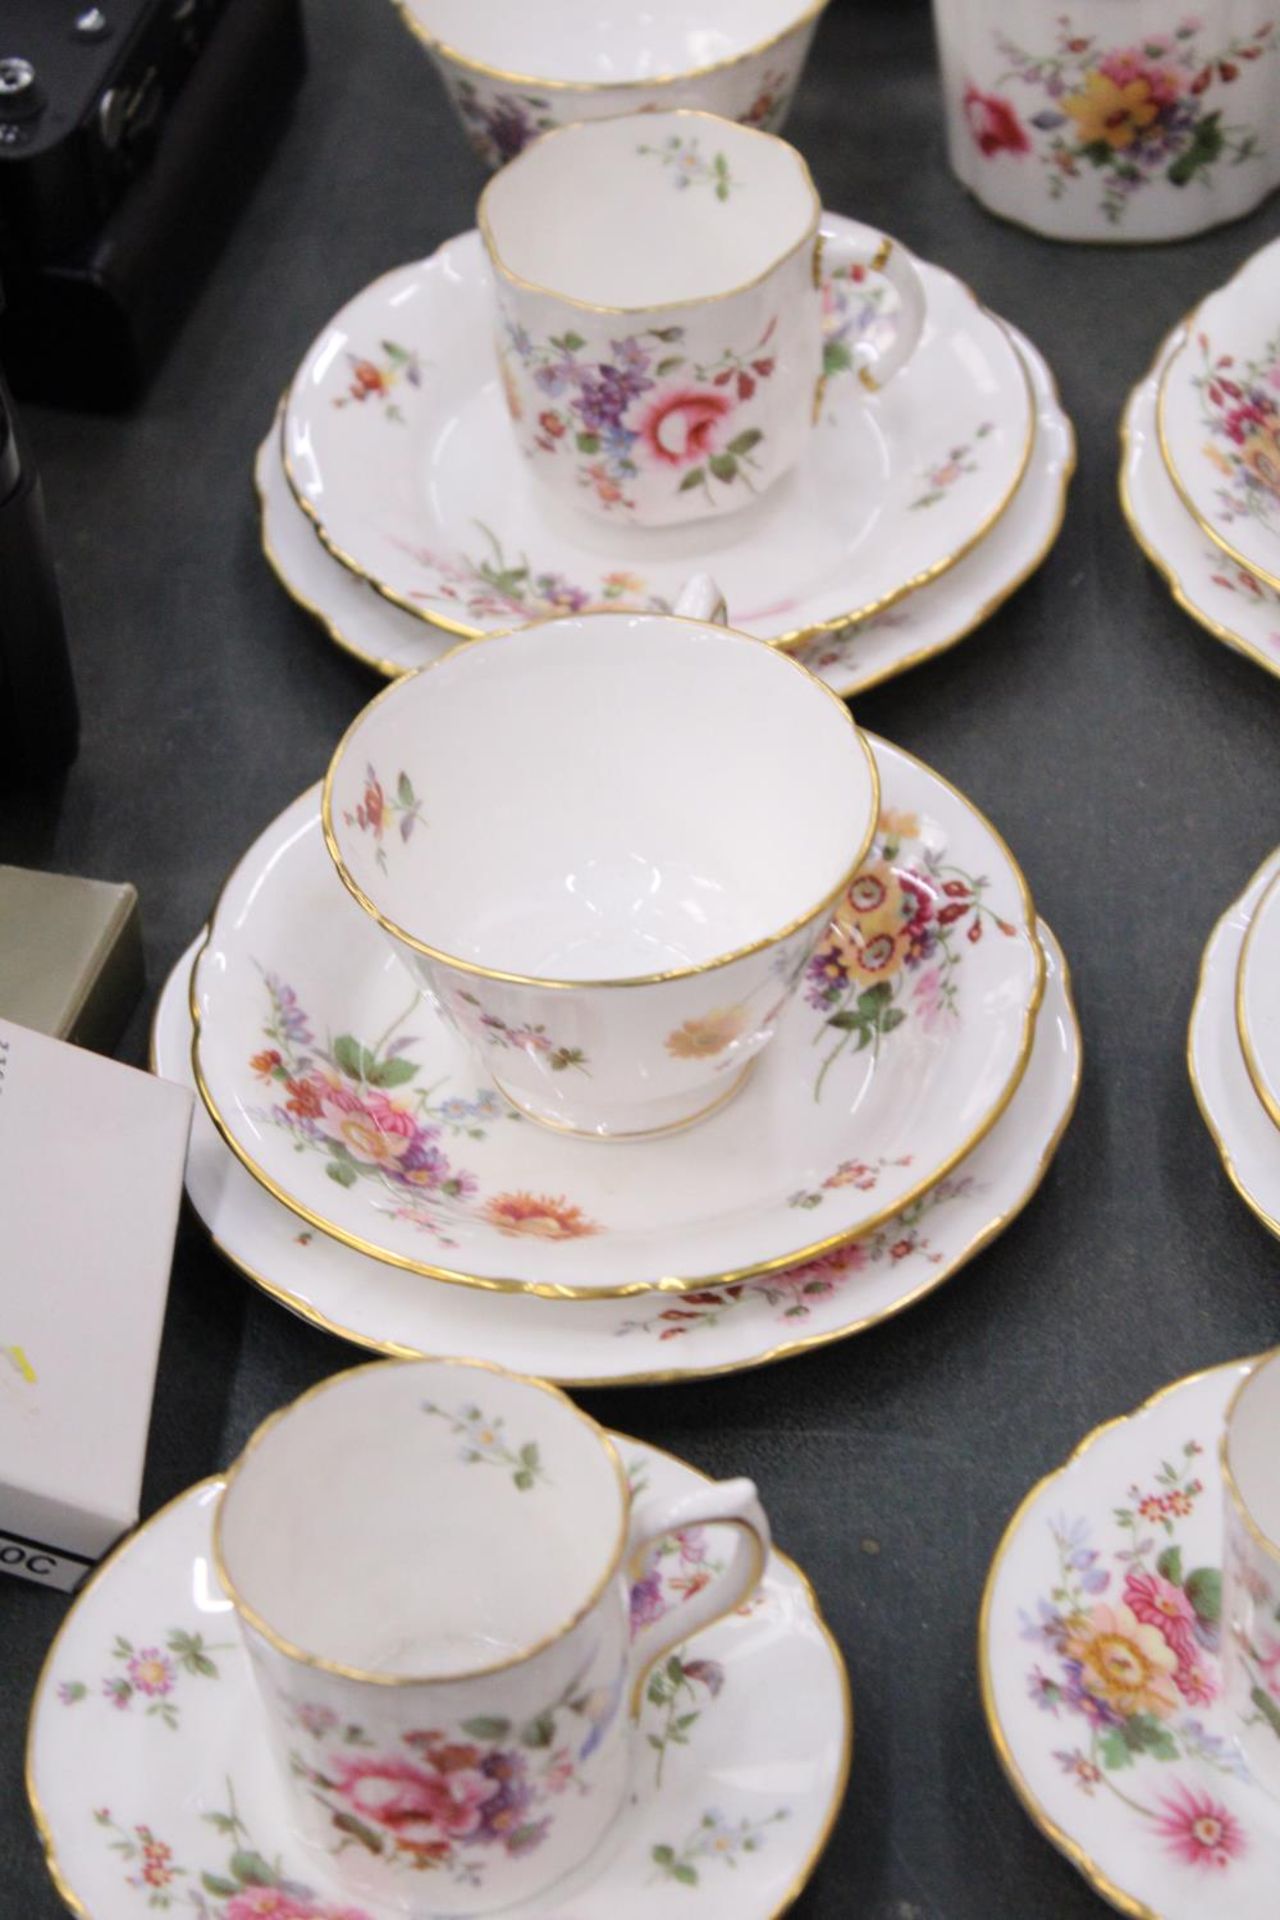 A COLLECTION OF ROYAL CROWN DERBY 'DERBY POSIES' CHINA TO INCLUDE CUPS AND SAUCERS, JUG, BEAKERS, - Image 6 of 6